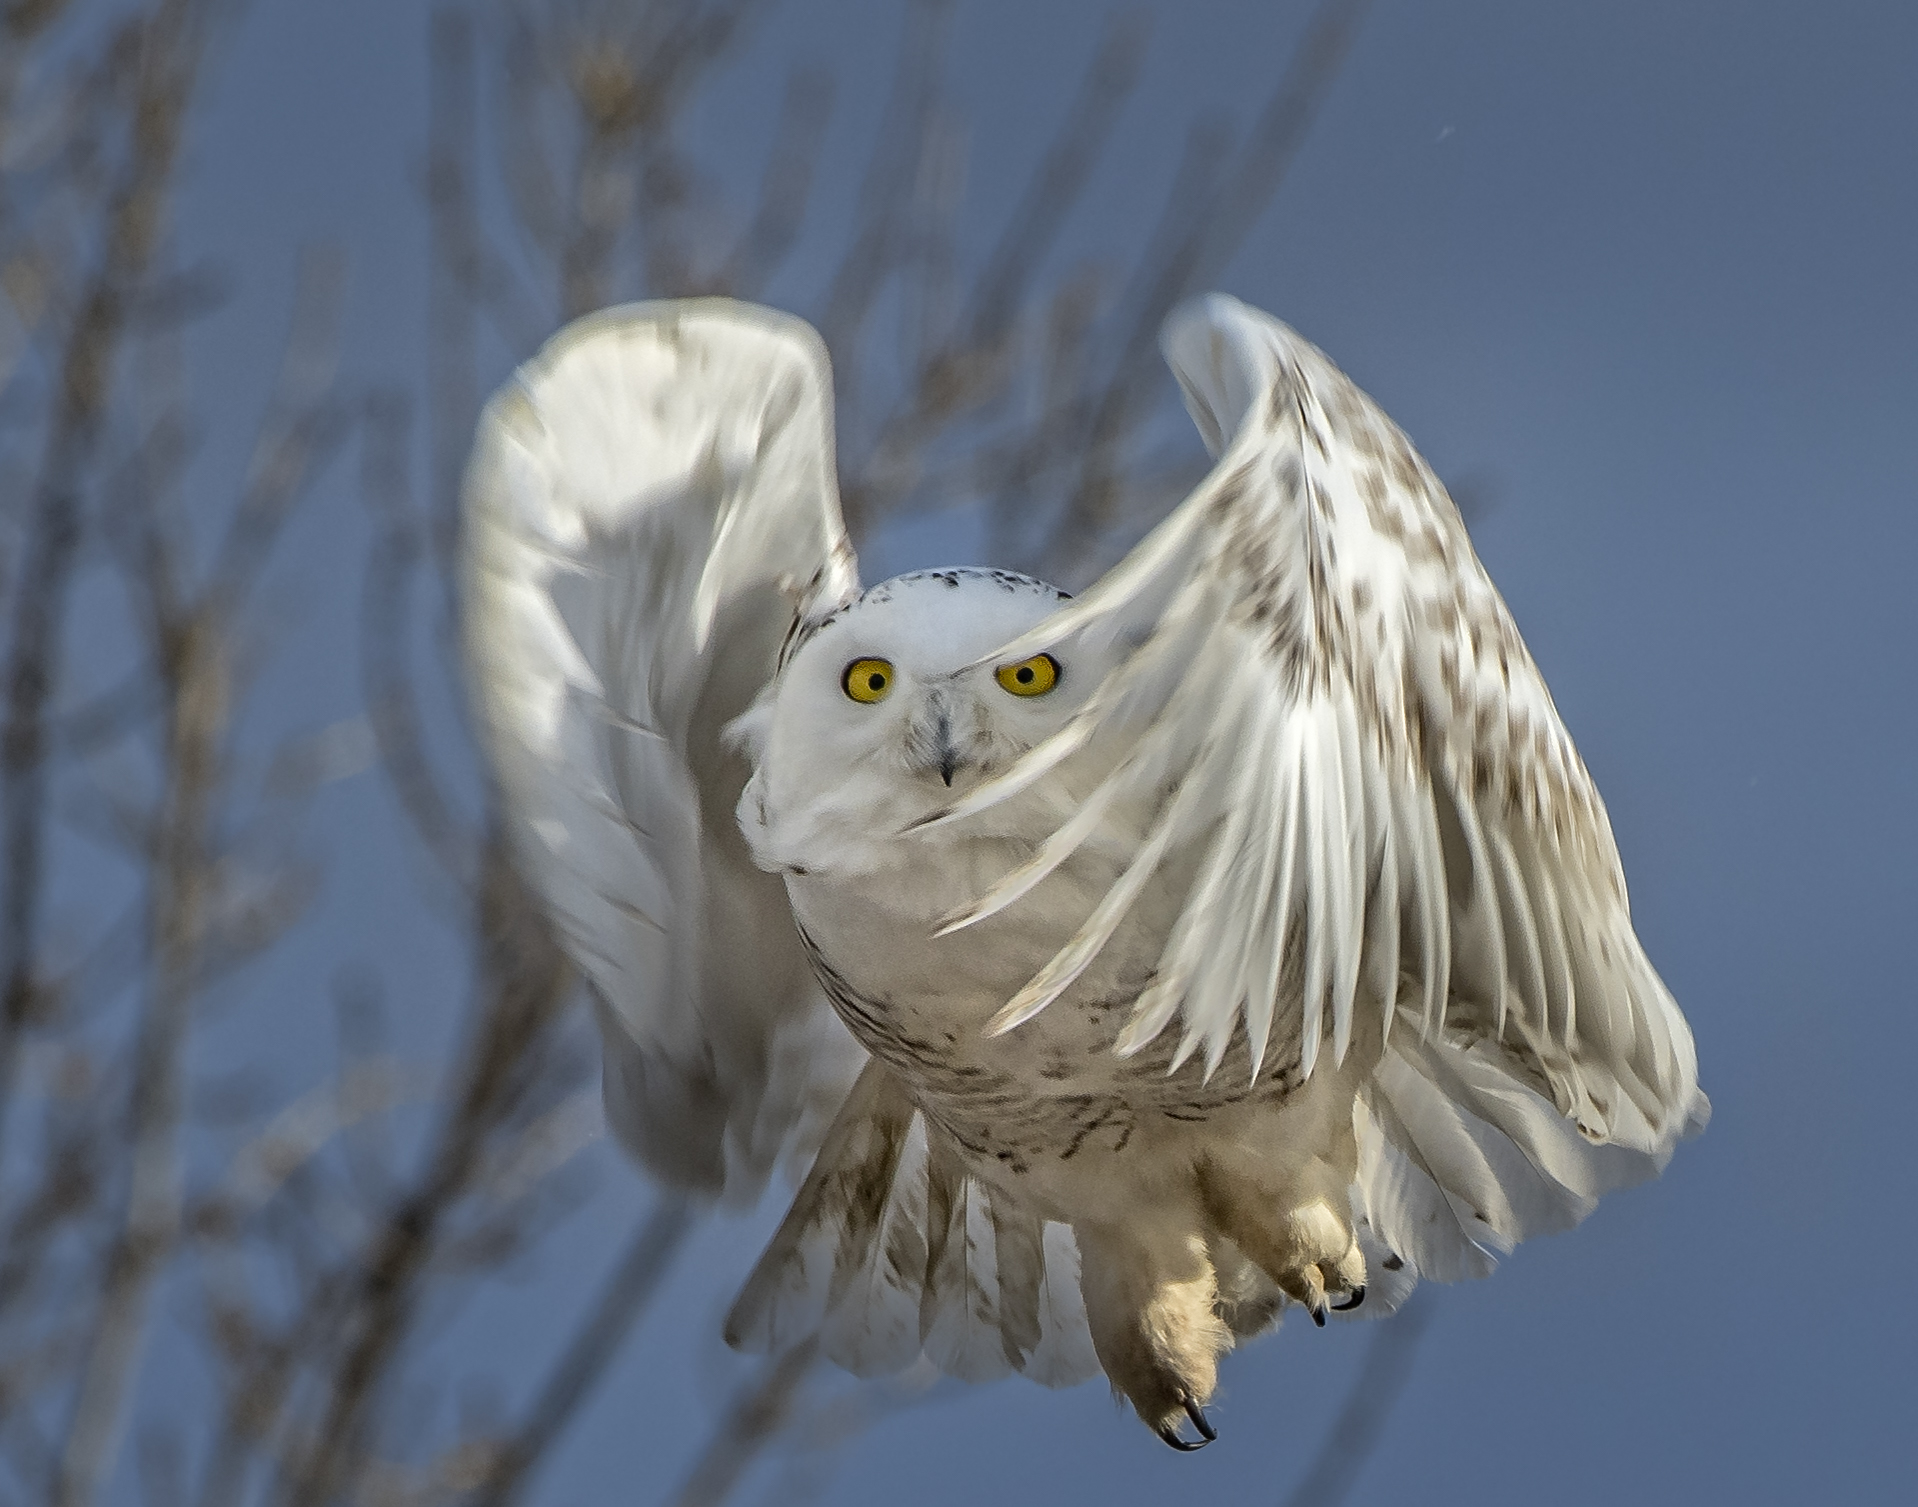 Rare snowy owls spotted in Colorado are drawing crowds beyond the ...